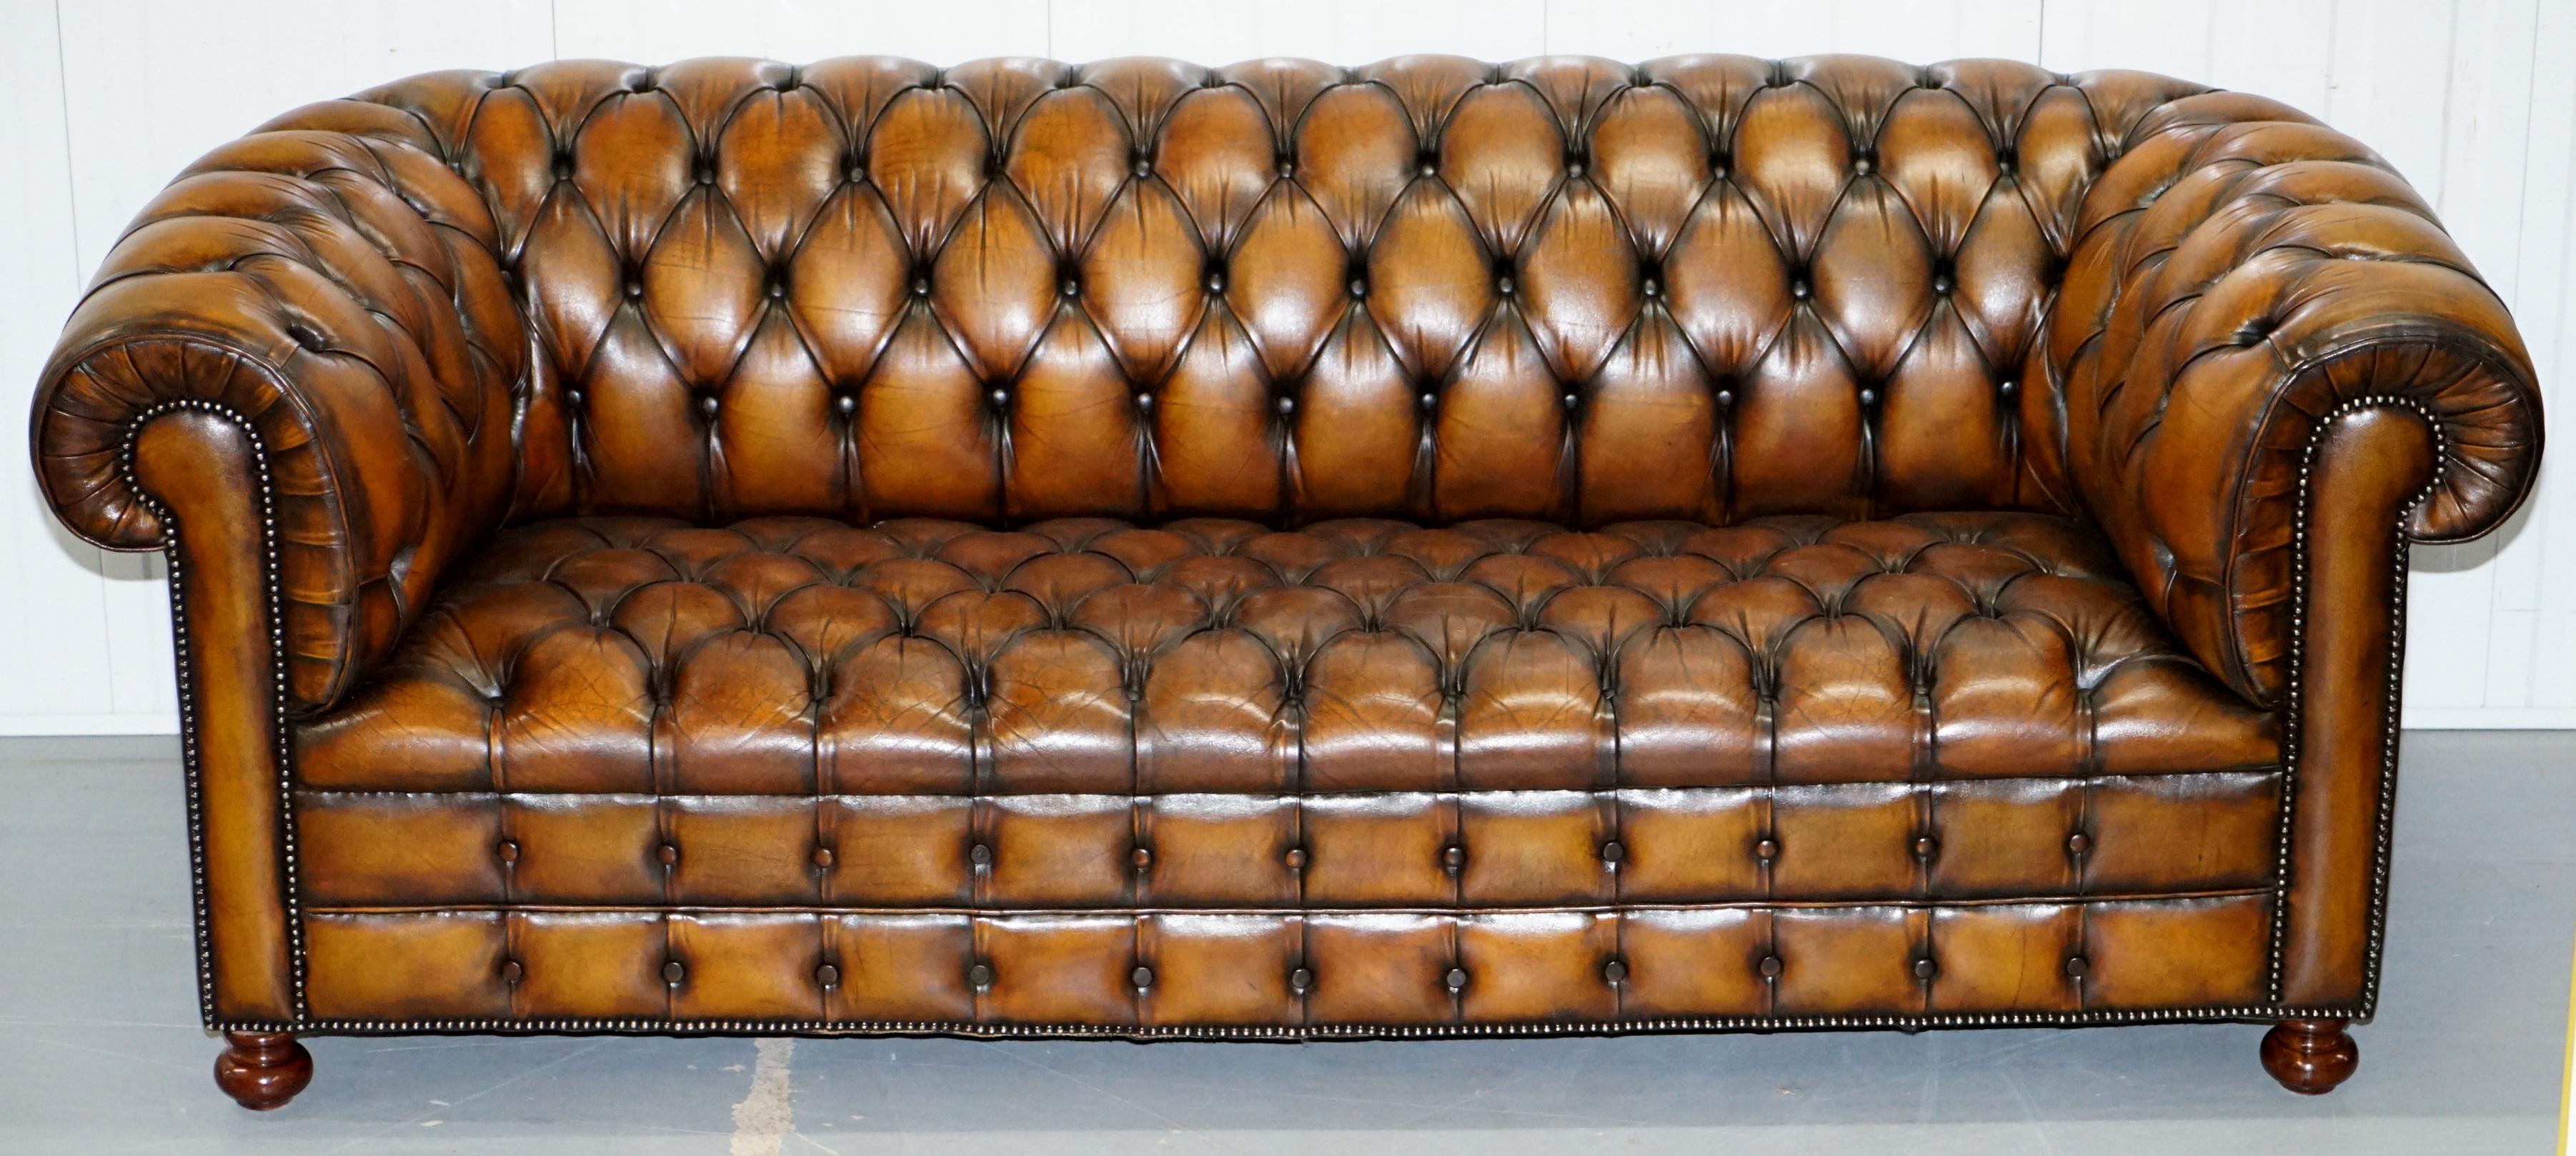 We are delighted to offer for sale this rare original vintage Whisky brown leather Chesterfield club sofa in newly restored condition with fully buttoned base 

This sofa is one of a pair, I have another which is exactly the same model going